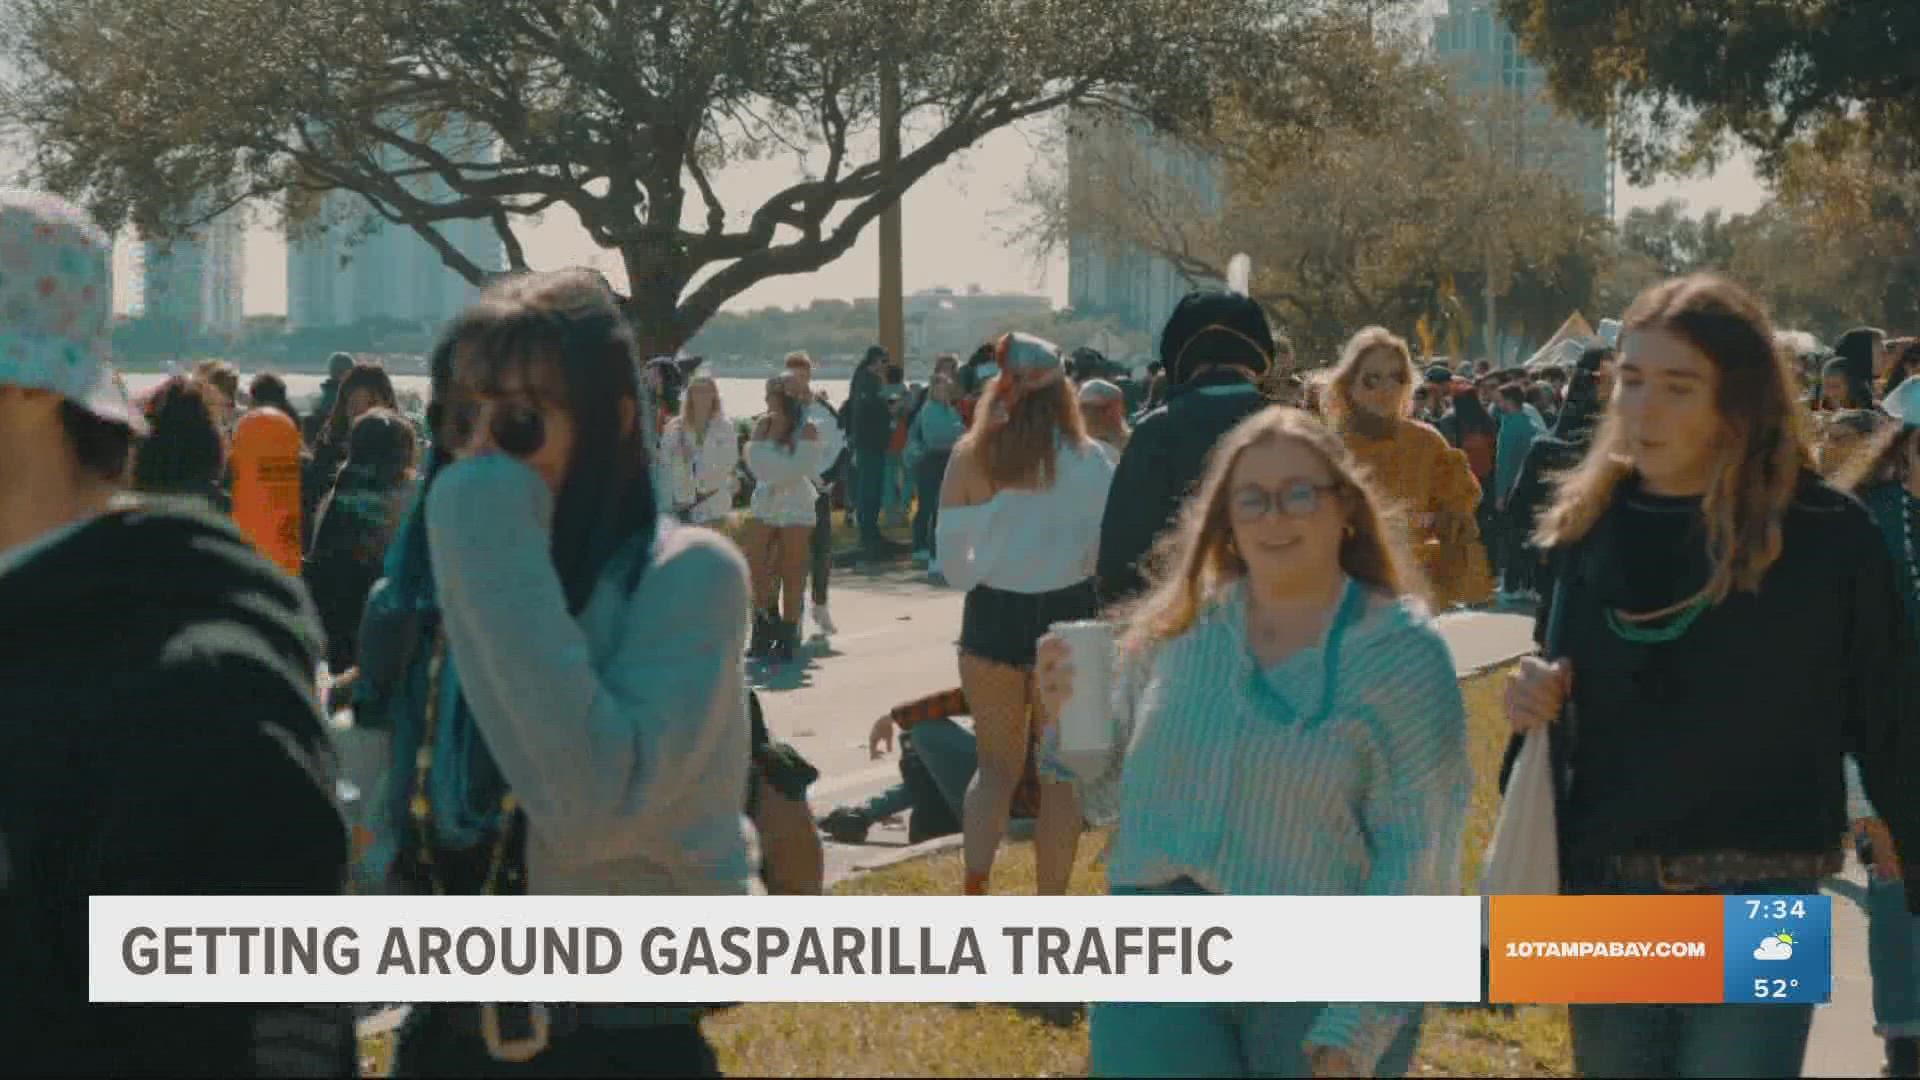 Don't let parking ruin your Gasparilla fun this year. Tampa's biggest pirate parade is finally here, and 10 Tampa Bay has your back on where to park.